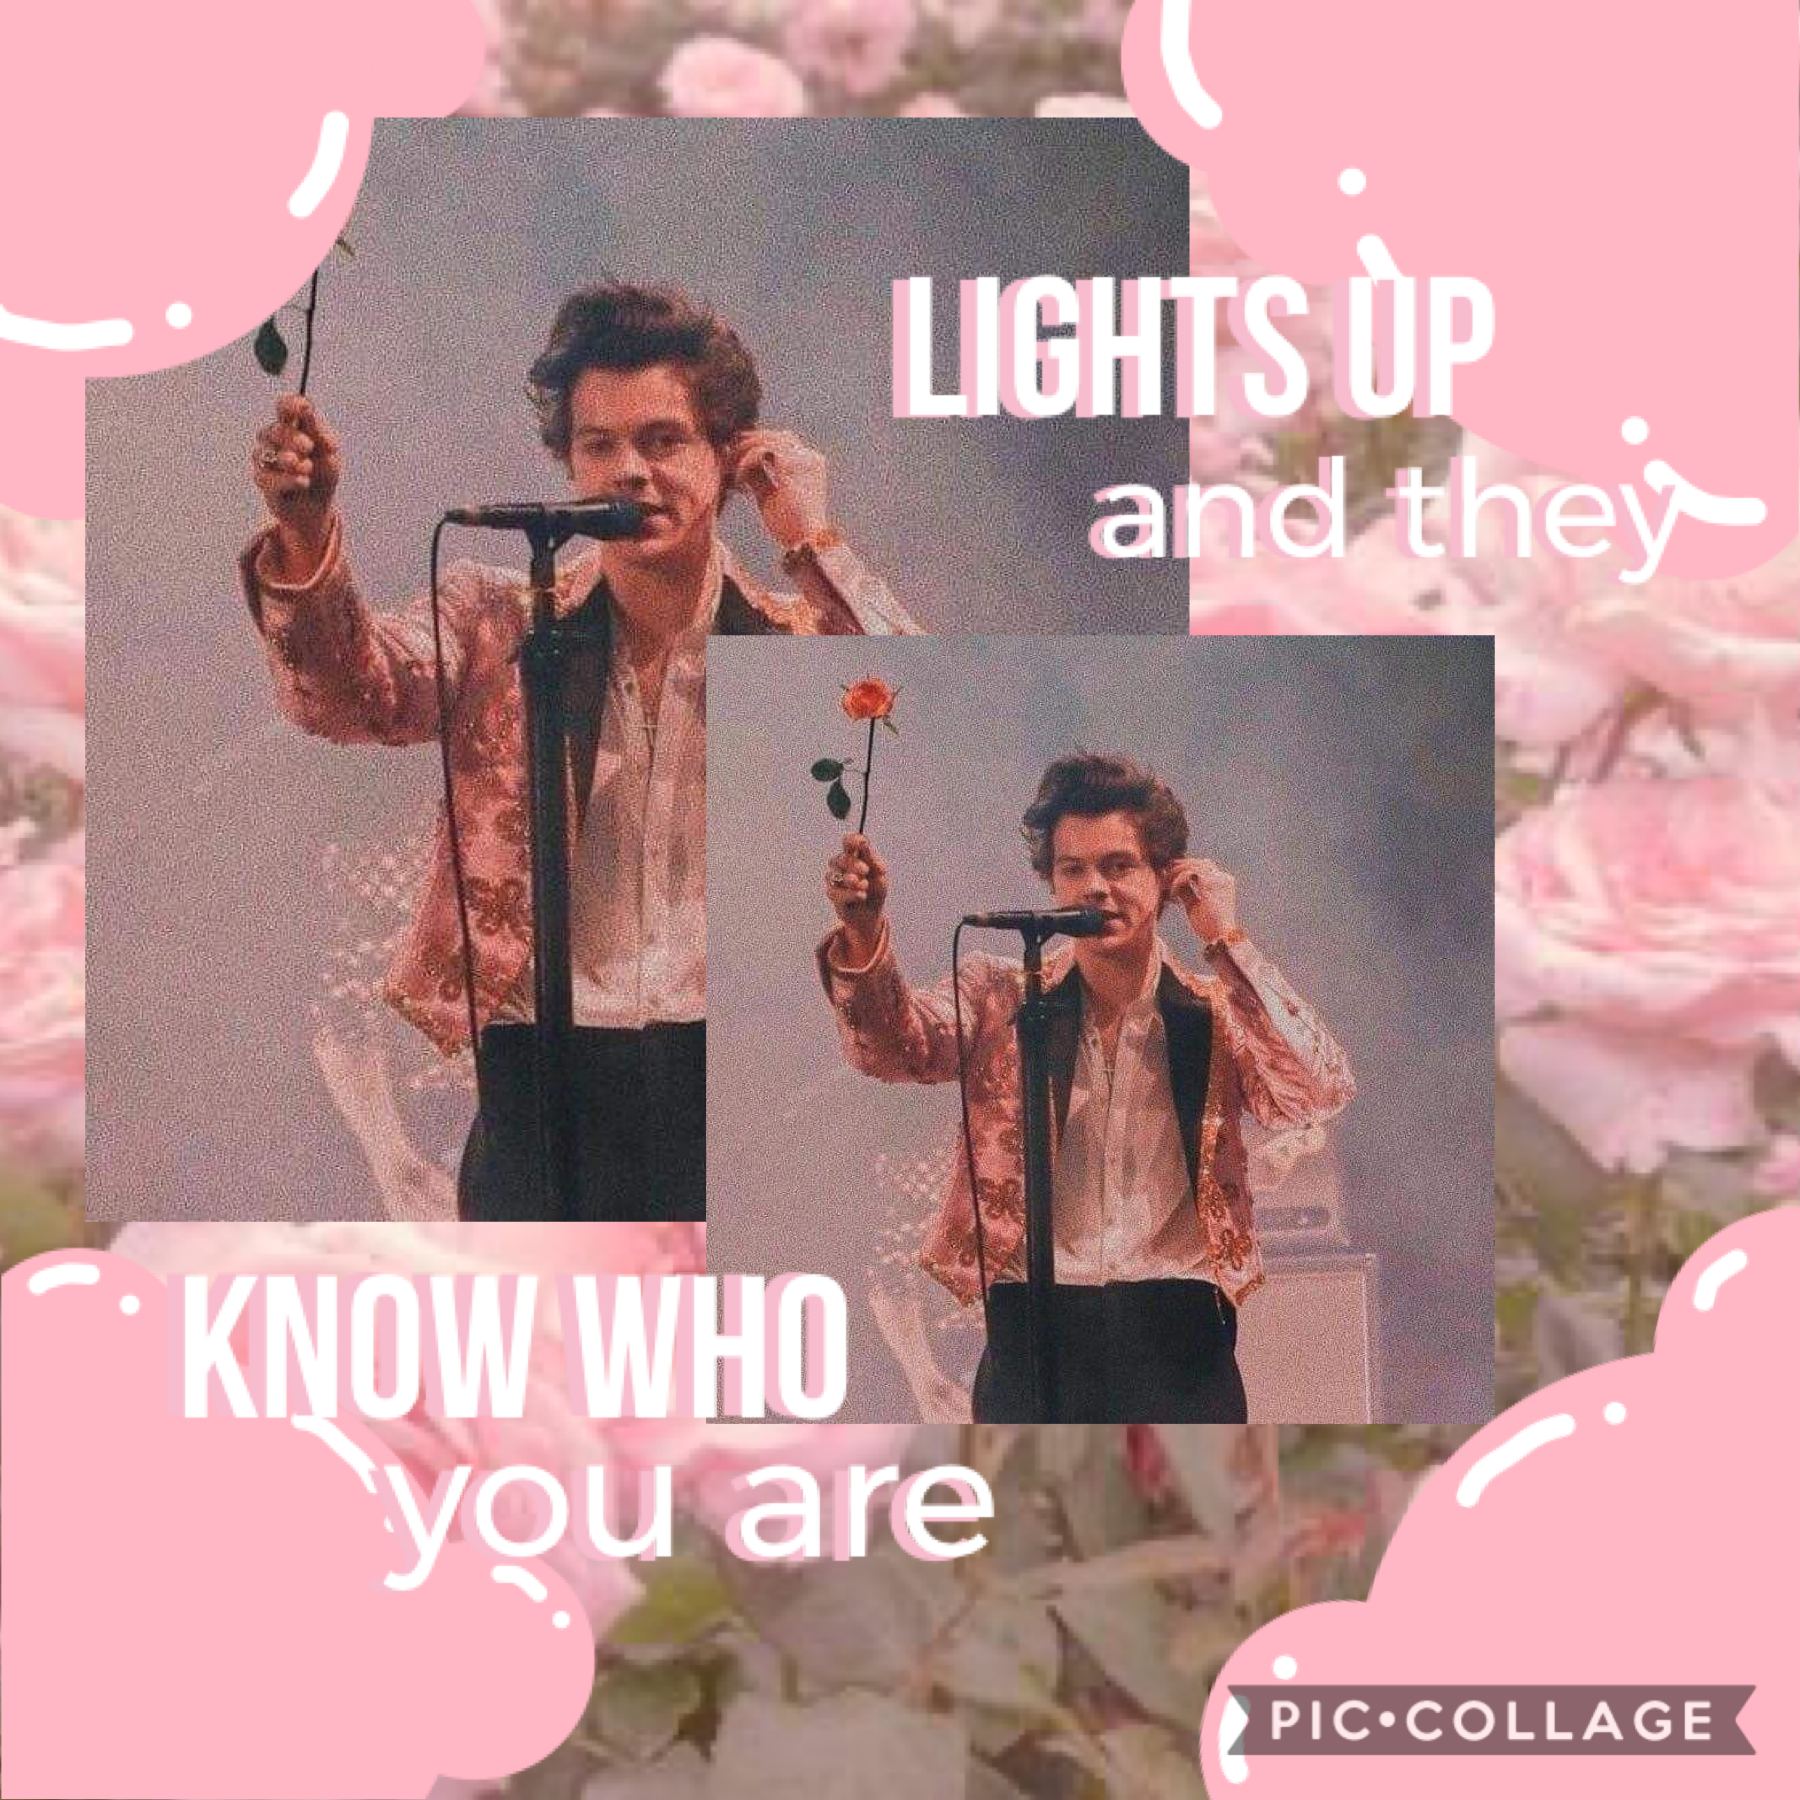 ayeee i don’t think this is good enough for my main but here it is on my extras pshhh
song: lights up by harry styles
go listen lauv’s album pls u won’t regret it
remix memes if u want to cuz i definitely want u to :)
what’s the most entertaining thing yo